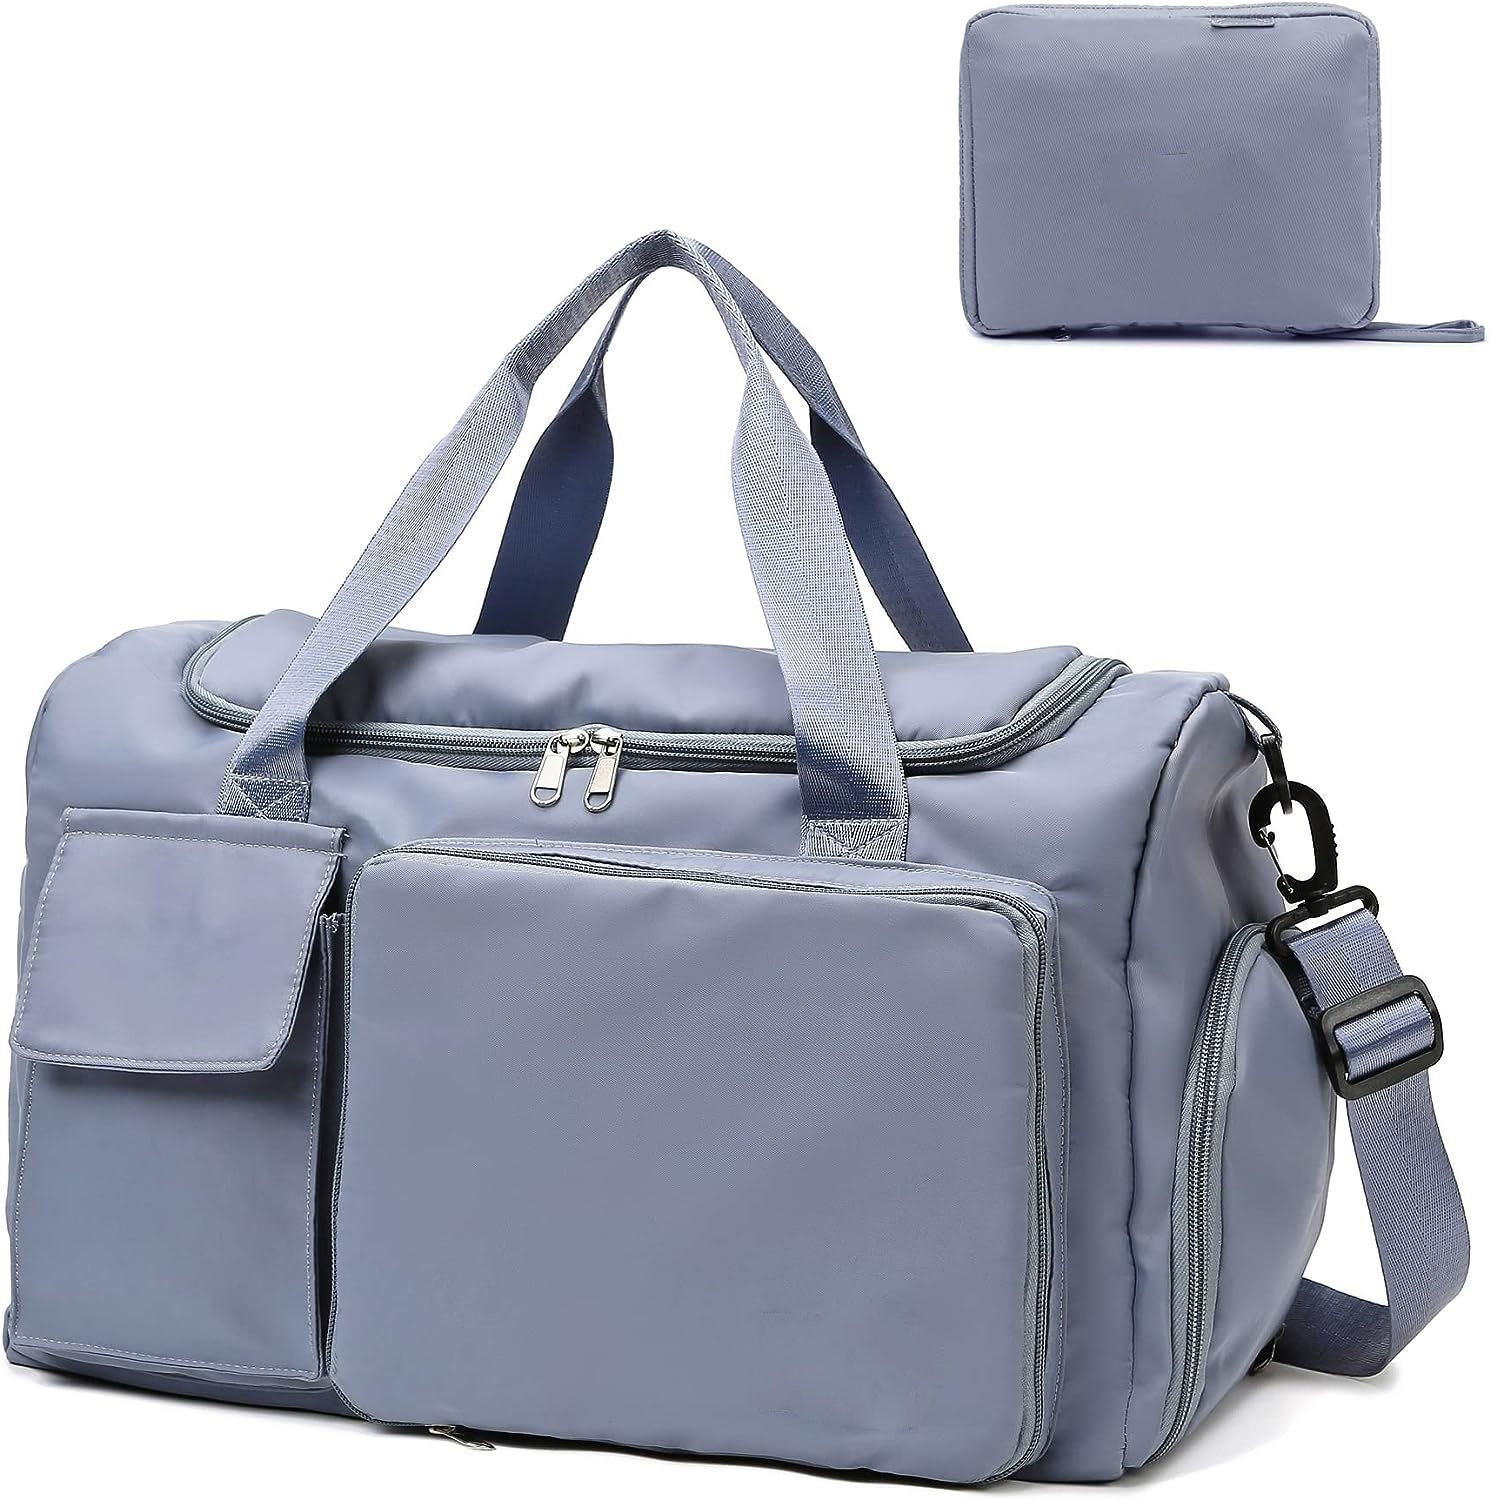 WellPromotion Collapsible Travel Bag